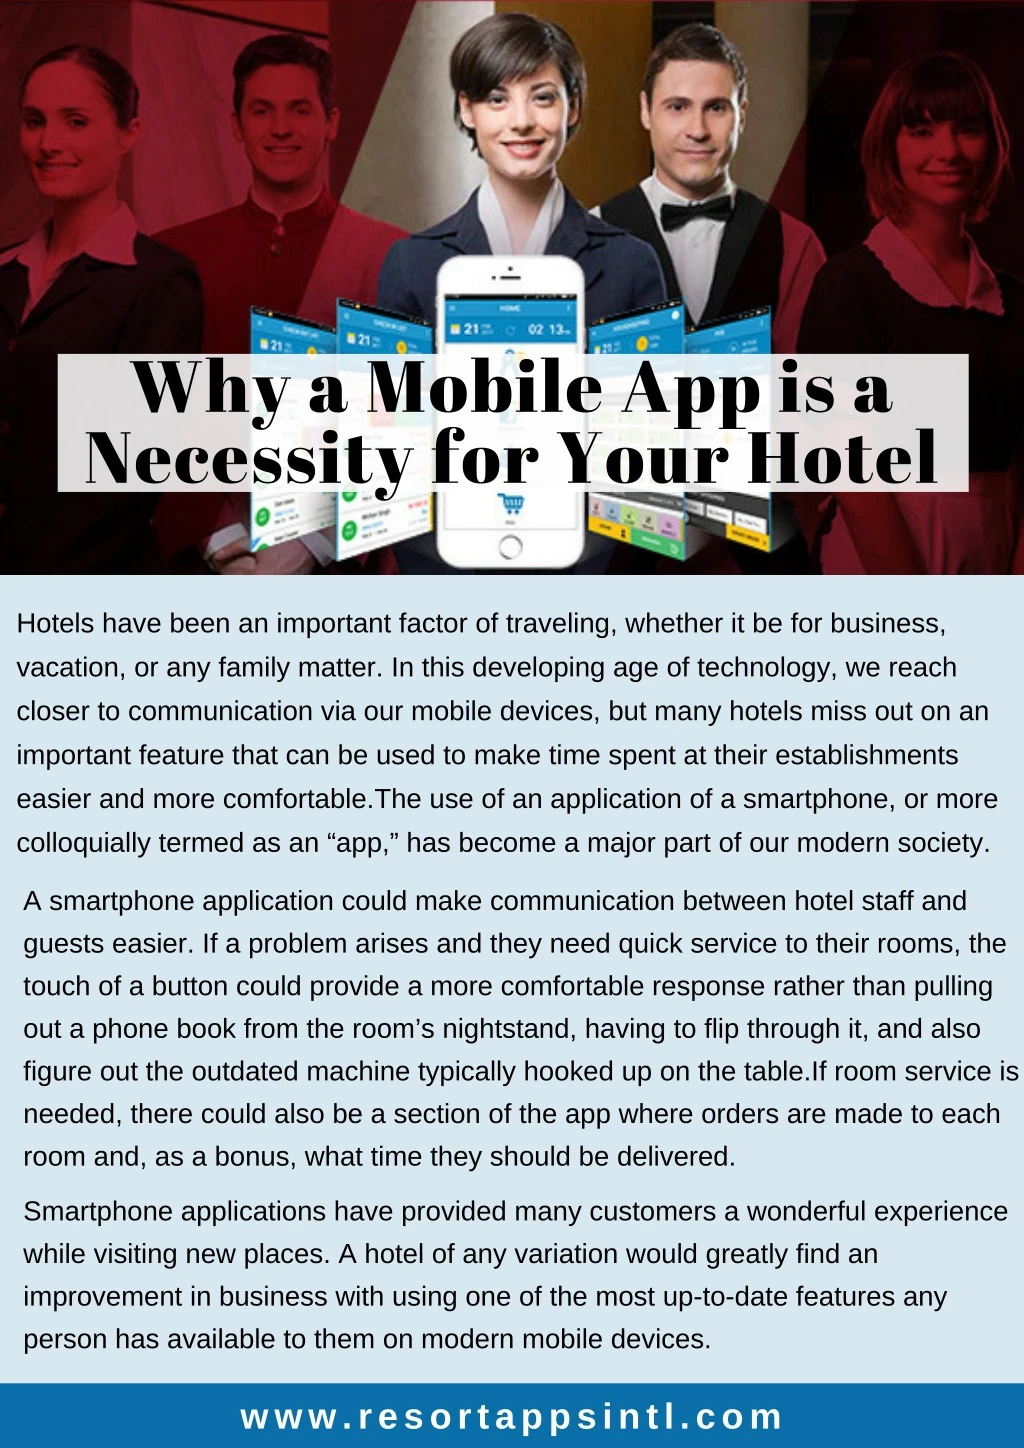 why a mobile app is a necessity for your hotel